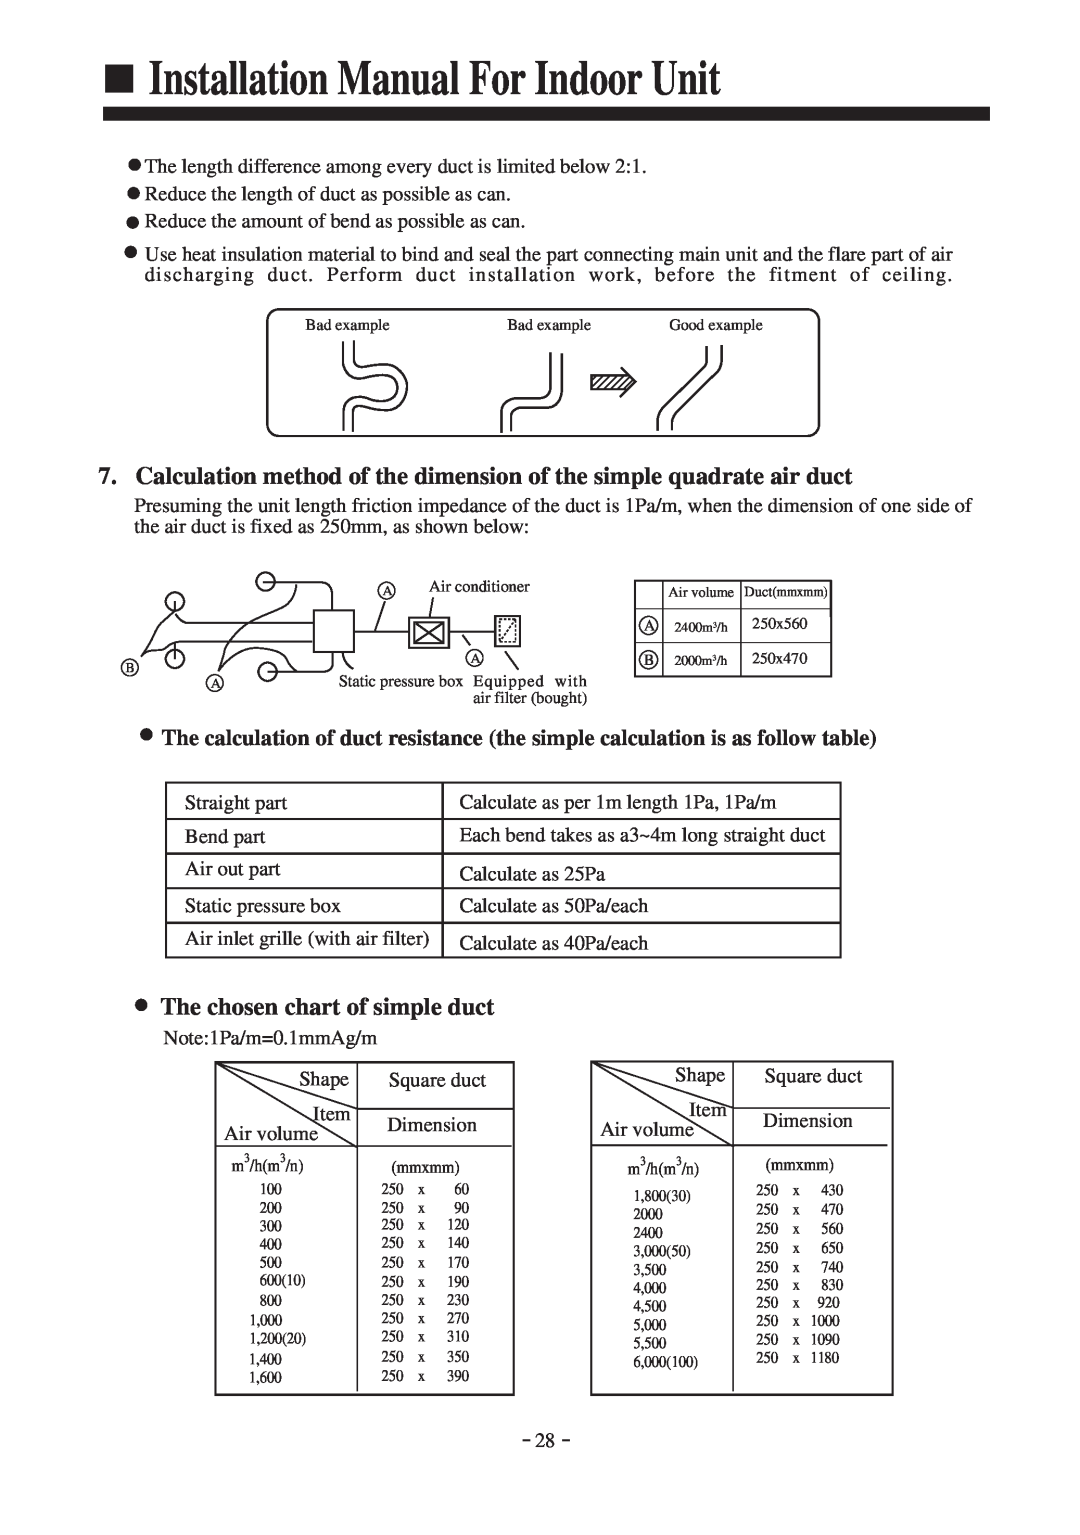 Haier HDU-42CF03/H installation manual The chosen chart of simple duct, Installation Manual For Indoor Unit 